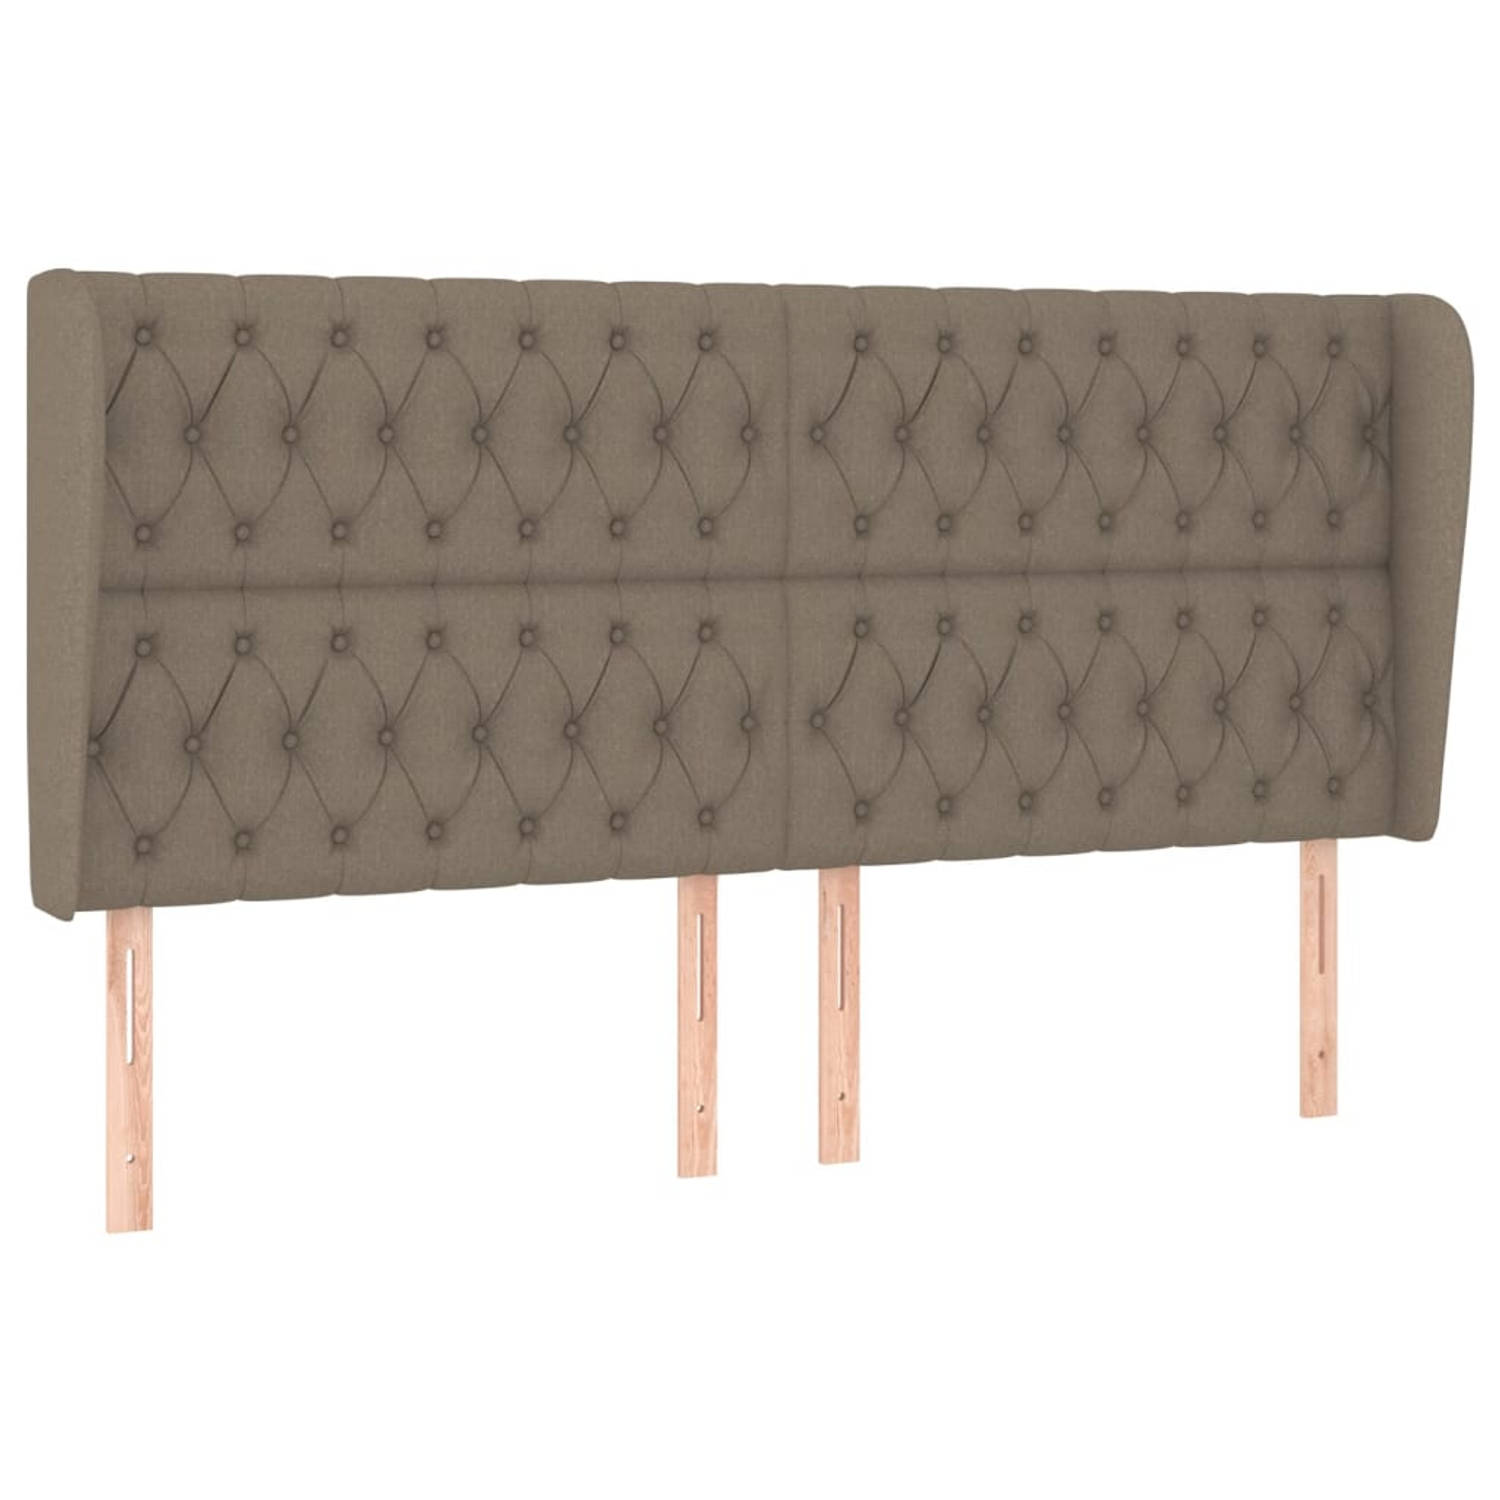 The Living Store Hoofdbord Bedombouw - 203 x 23 x 118/128 cm - Taupe